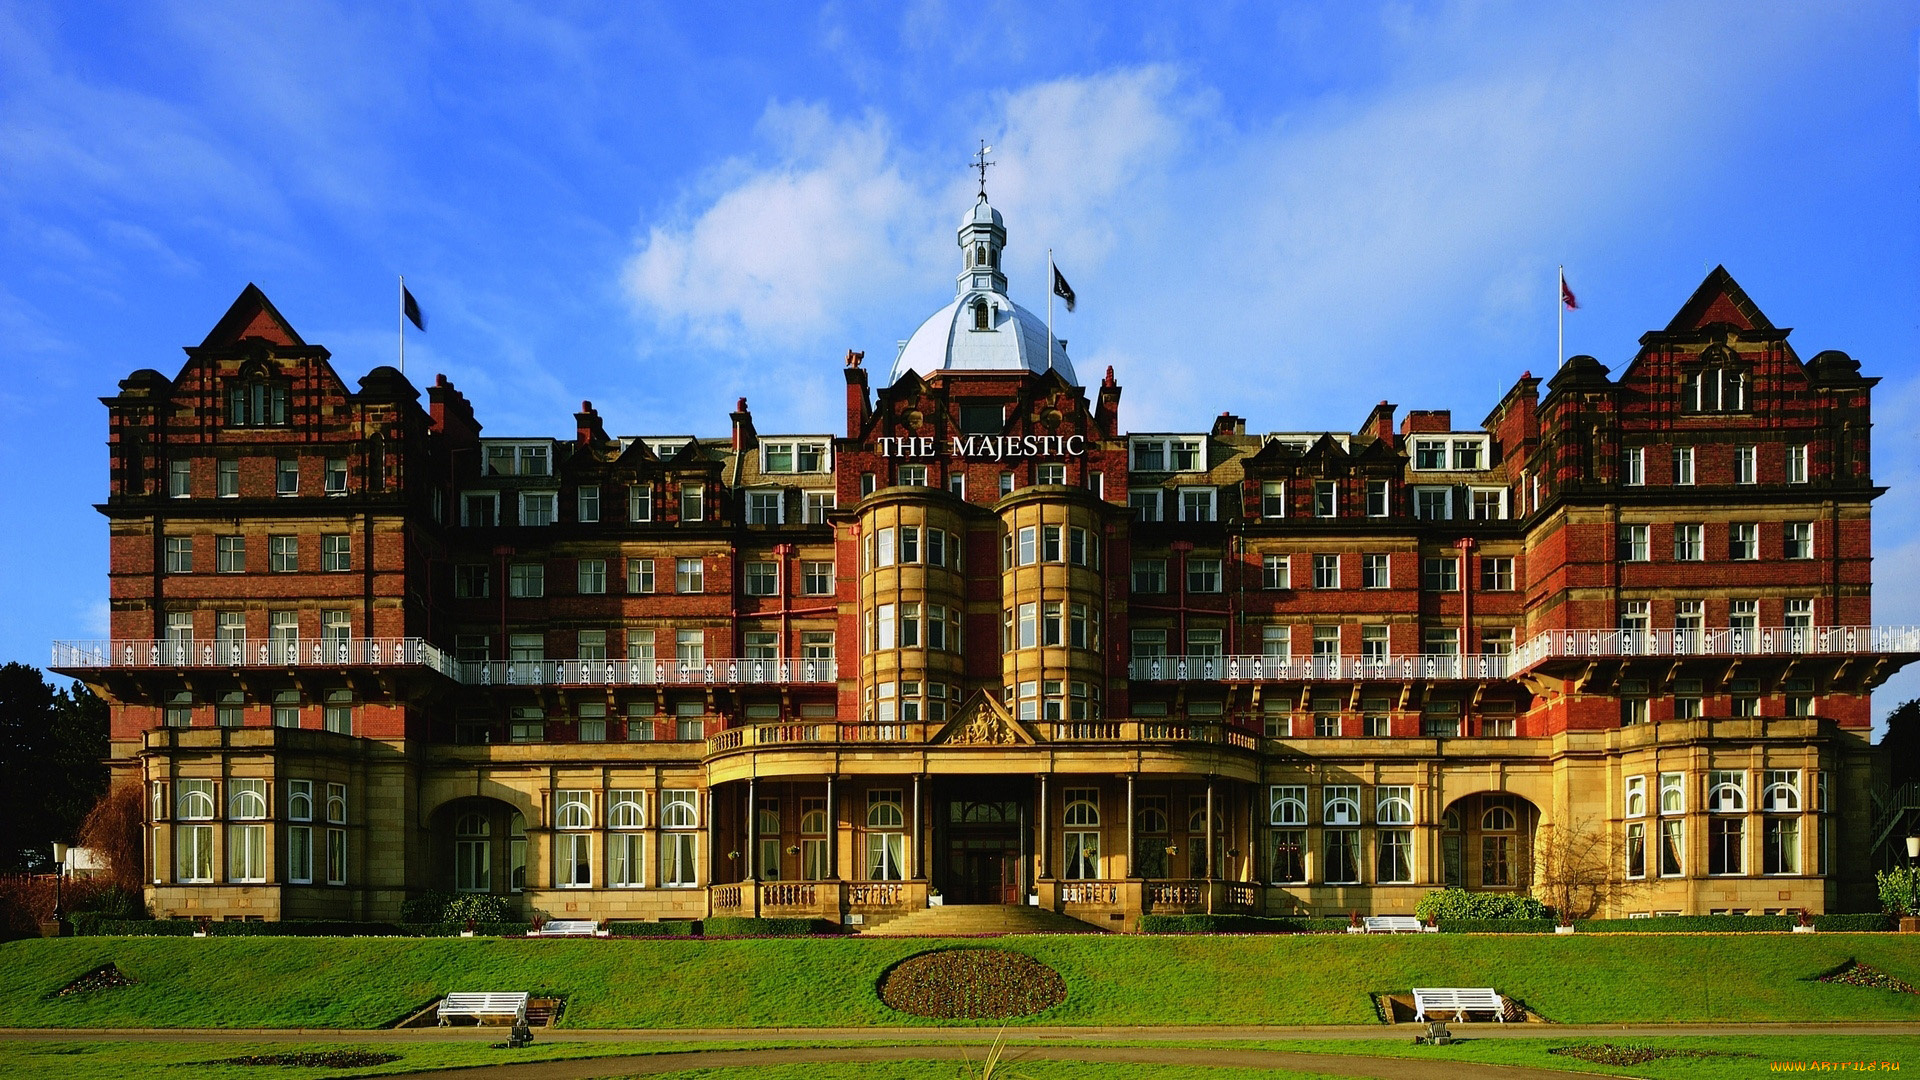 the, majestic, hotel, north, yorkshire, england, города, -, здания, , дома, the, majestic, hotel, north, yorkshire